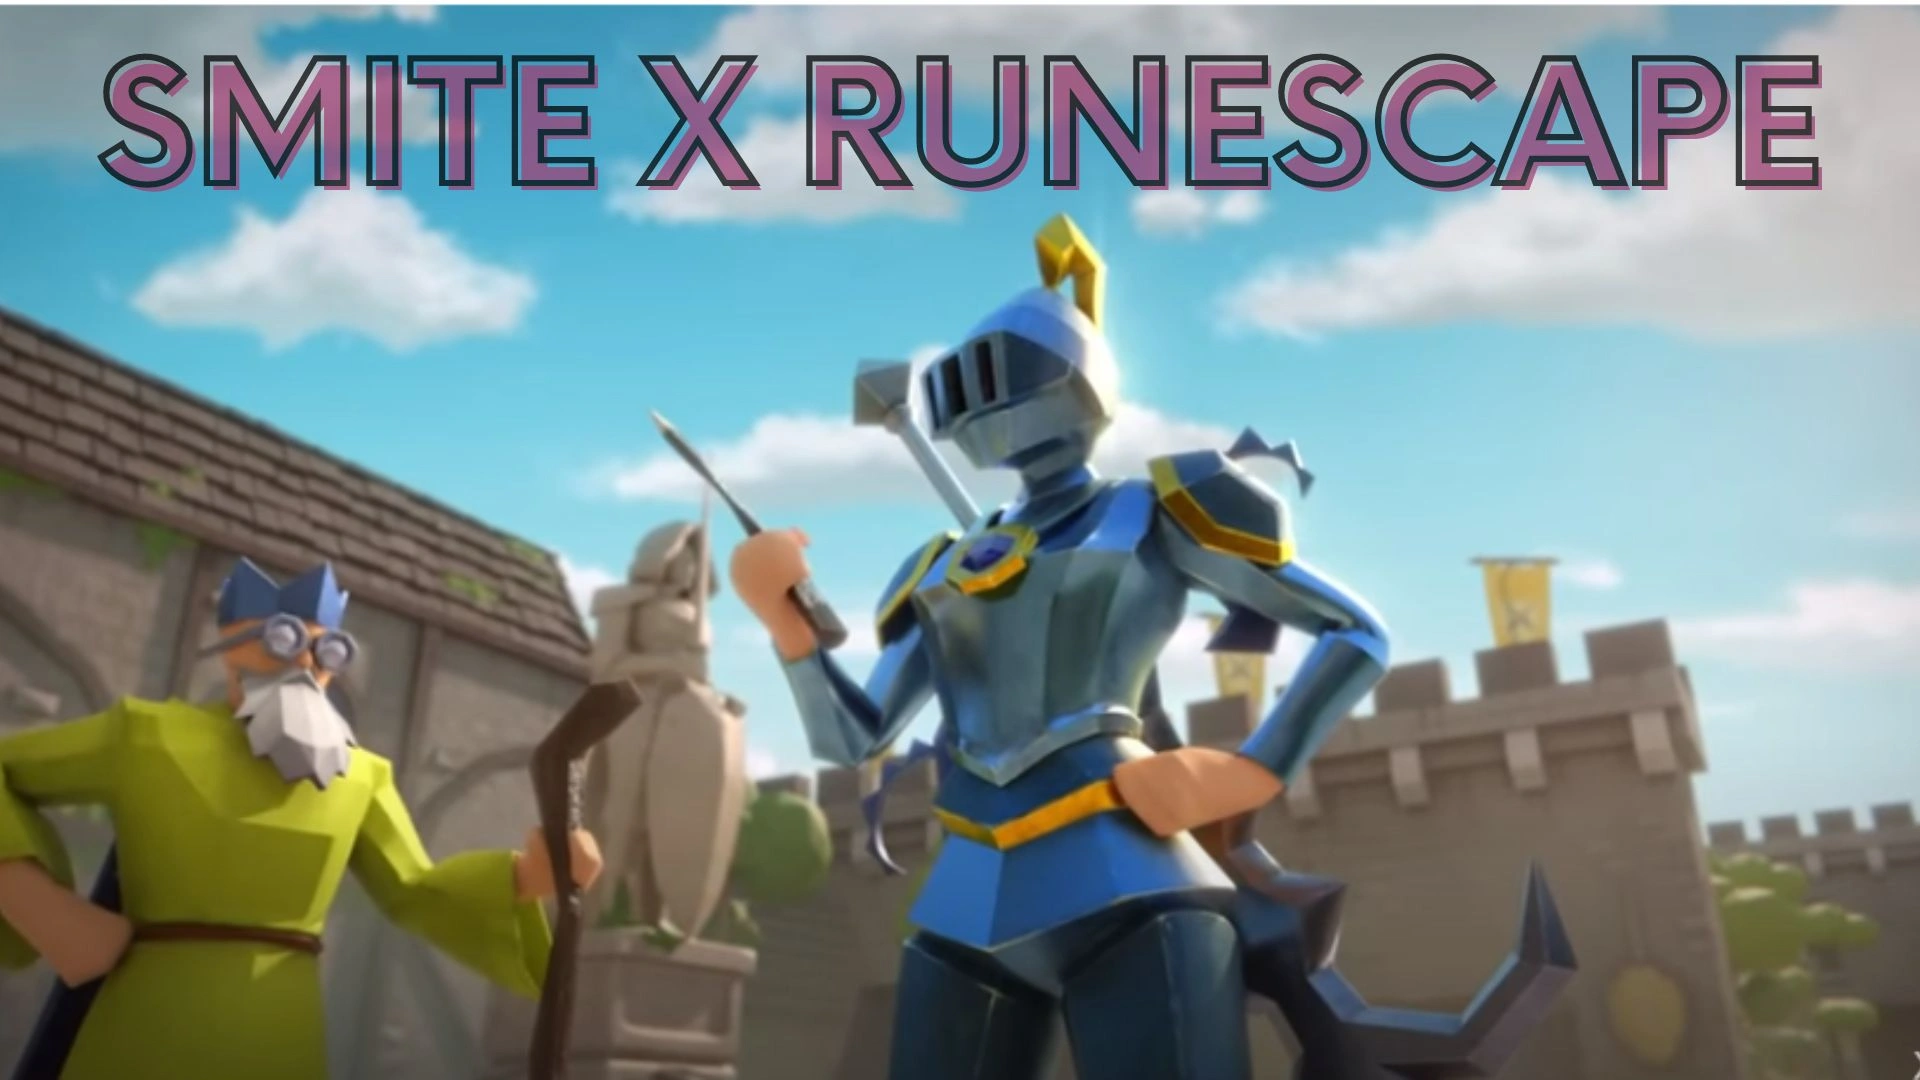 SMITE x RuneScape Parents Guide and Age Rating (2022)